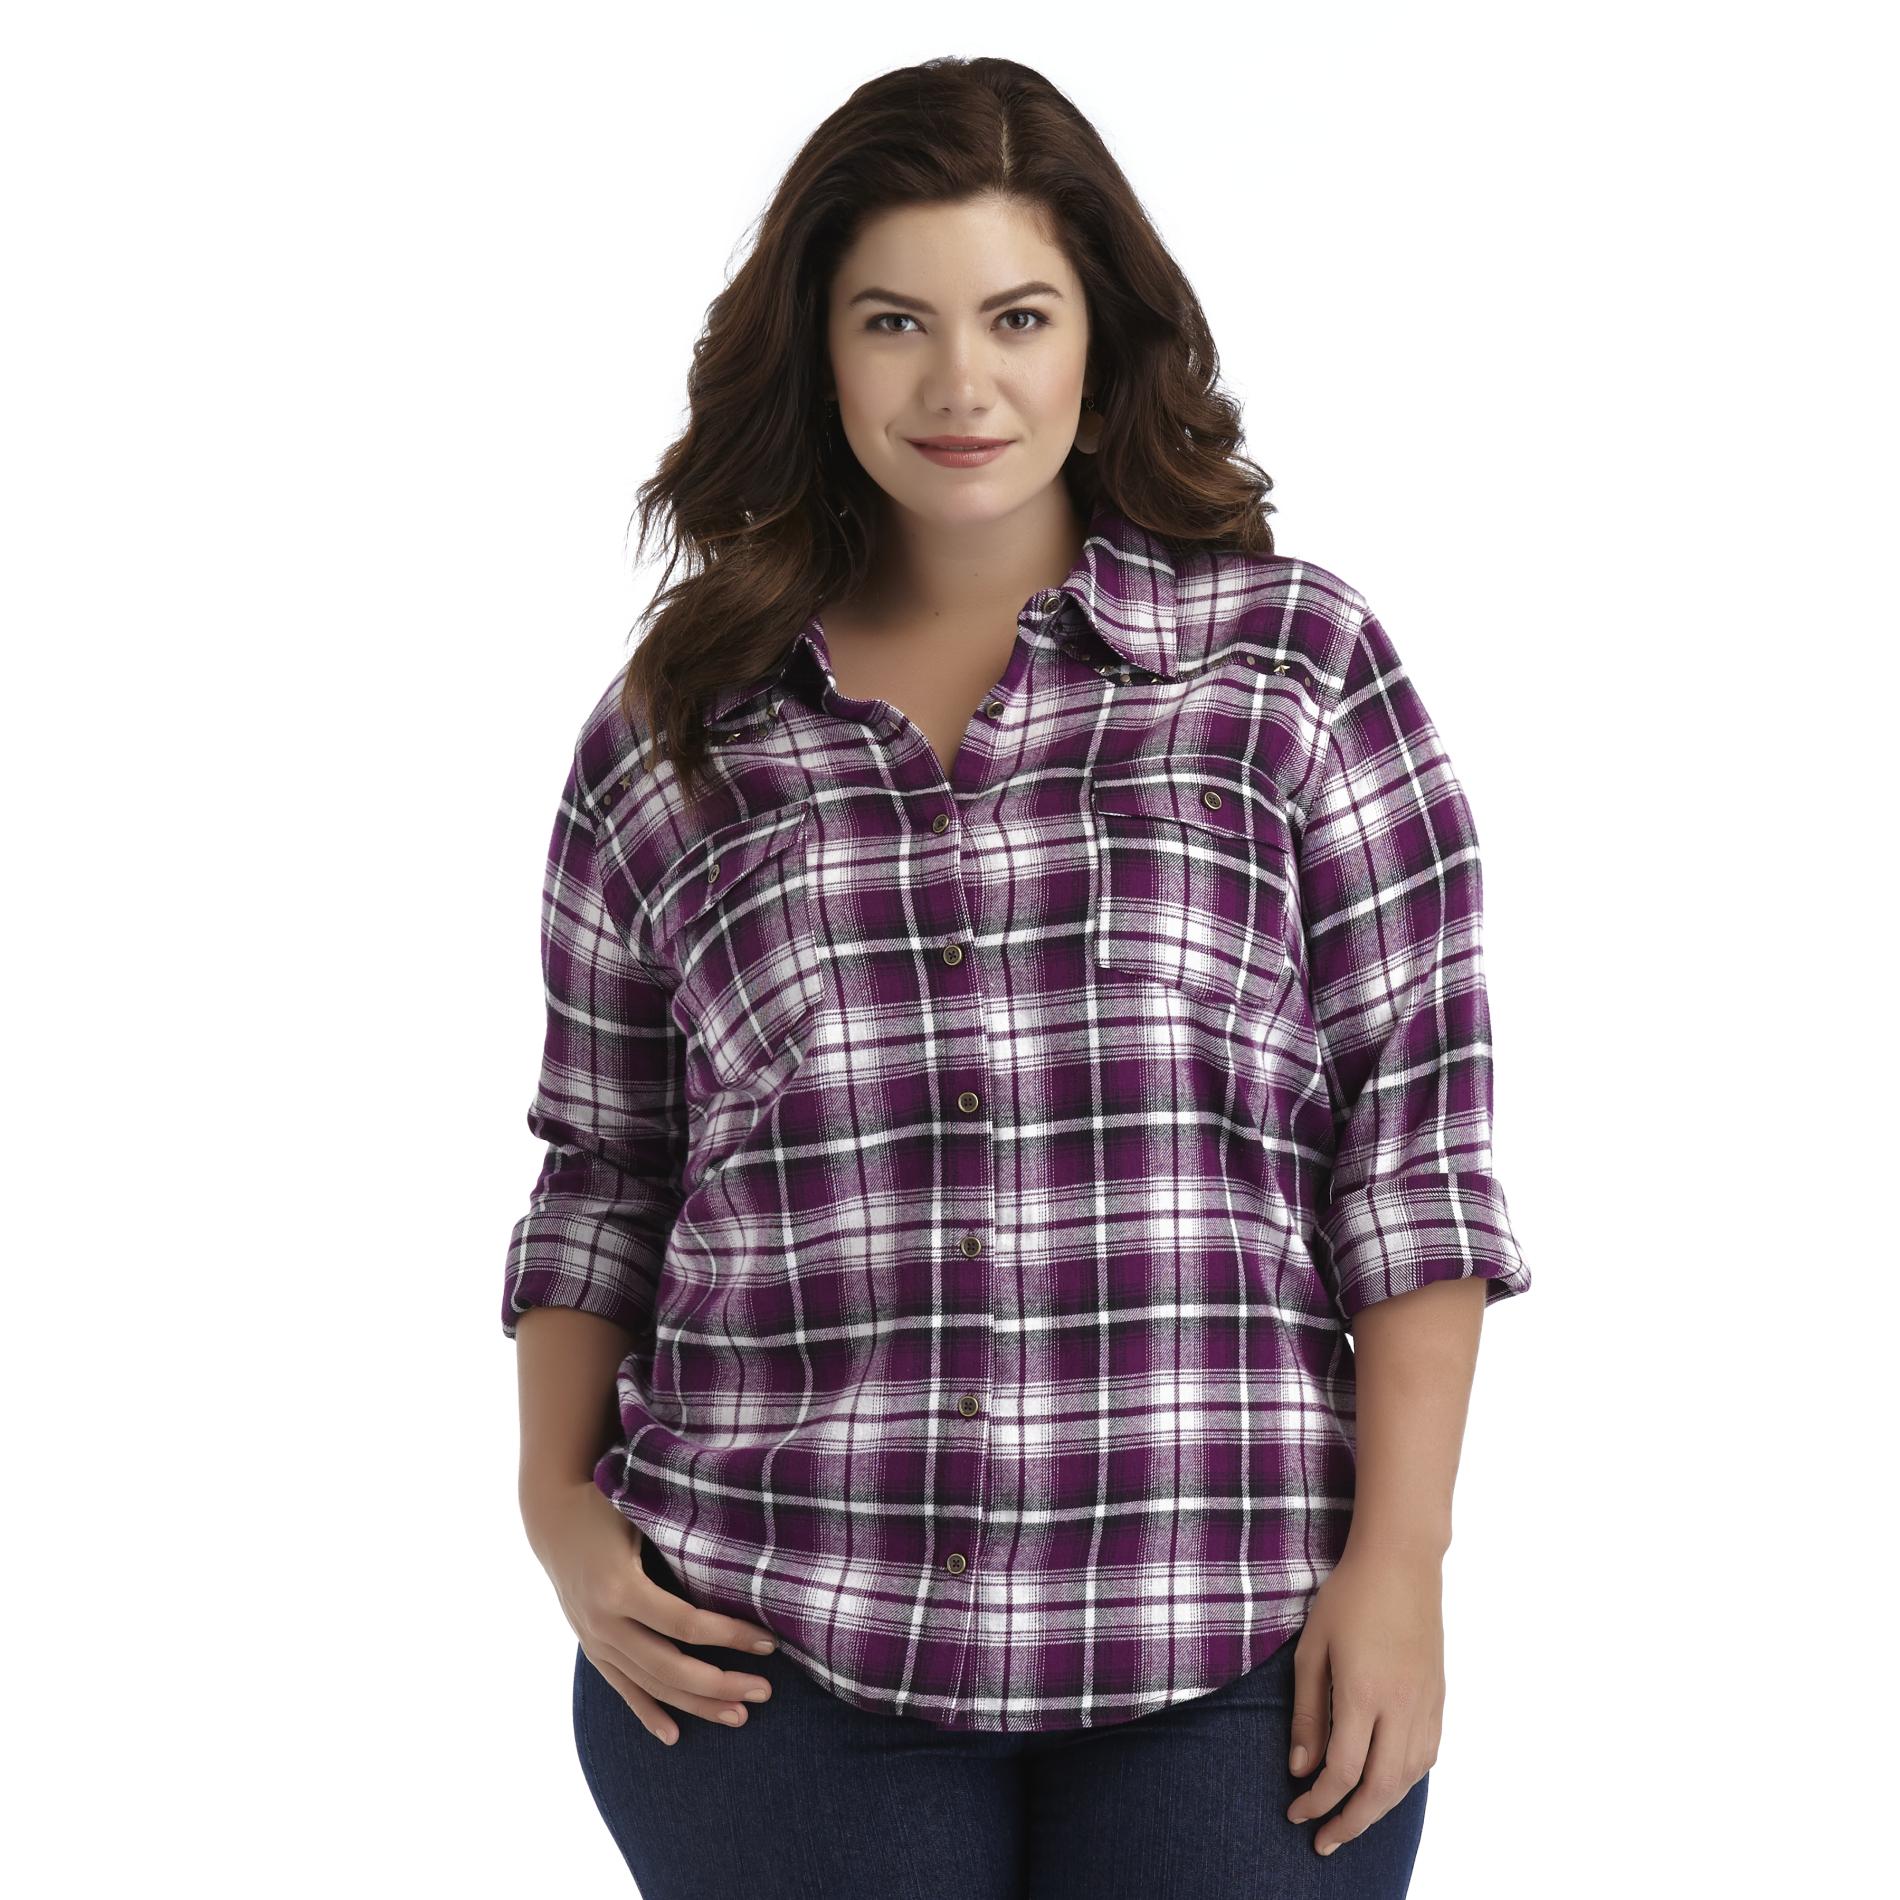 Jaclyn Smith Women's Plus Embellished Flannel Shirt - Plaid